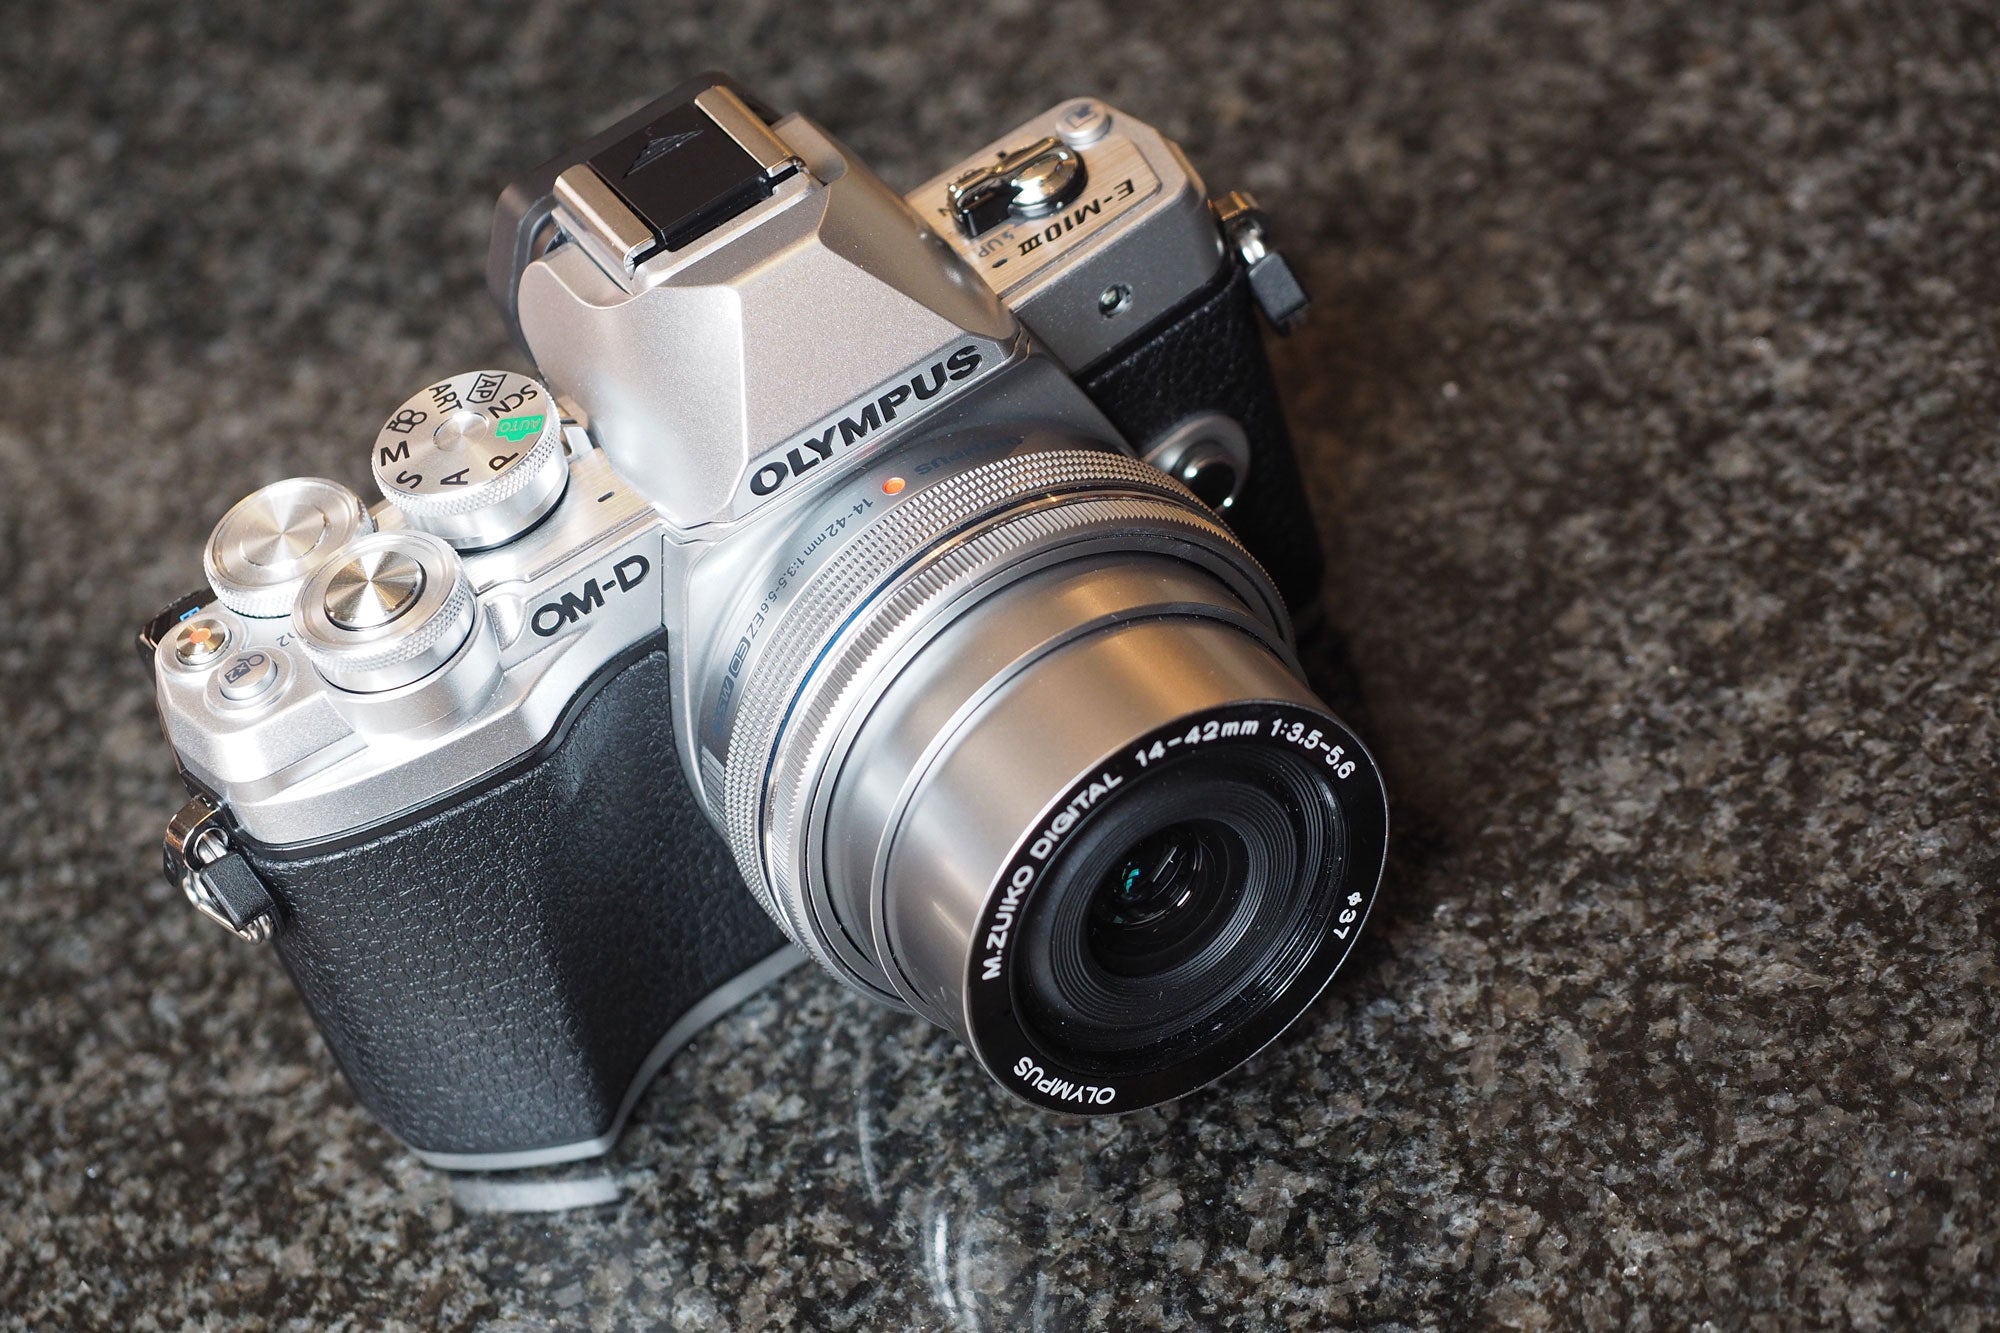 Olympus OM-D E-M10 Mark III Review | Trusted Reviews